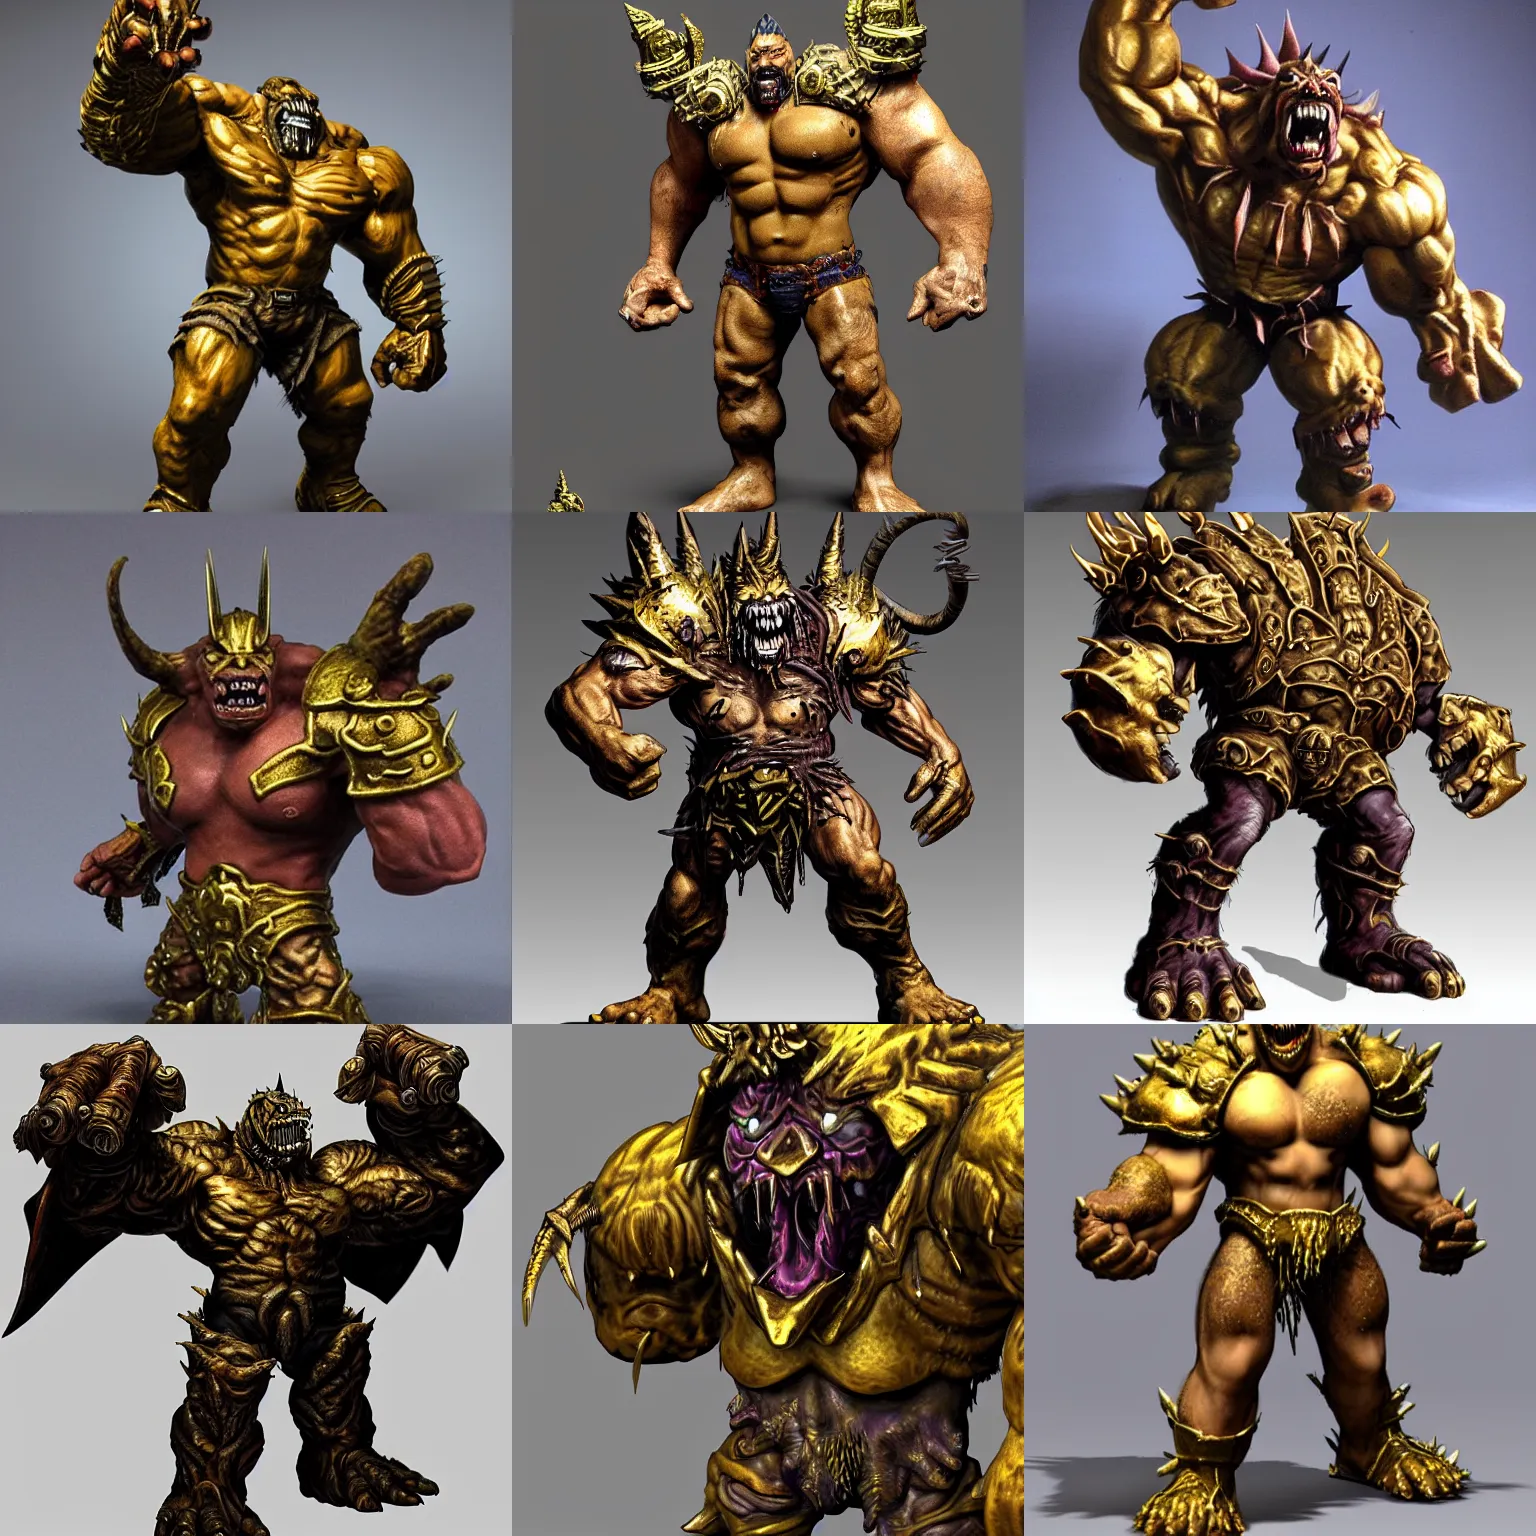 Prompt: ugly monster by Chris Metzen, spikes on the body, huge muscles, gold armor